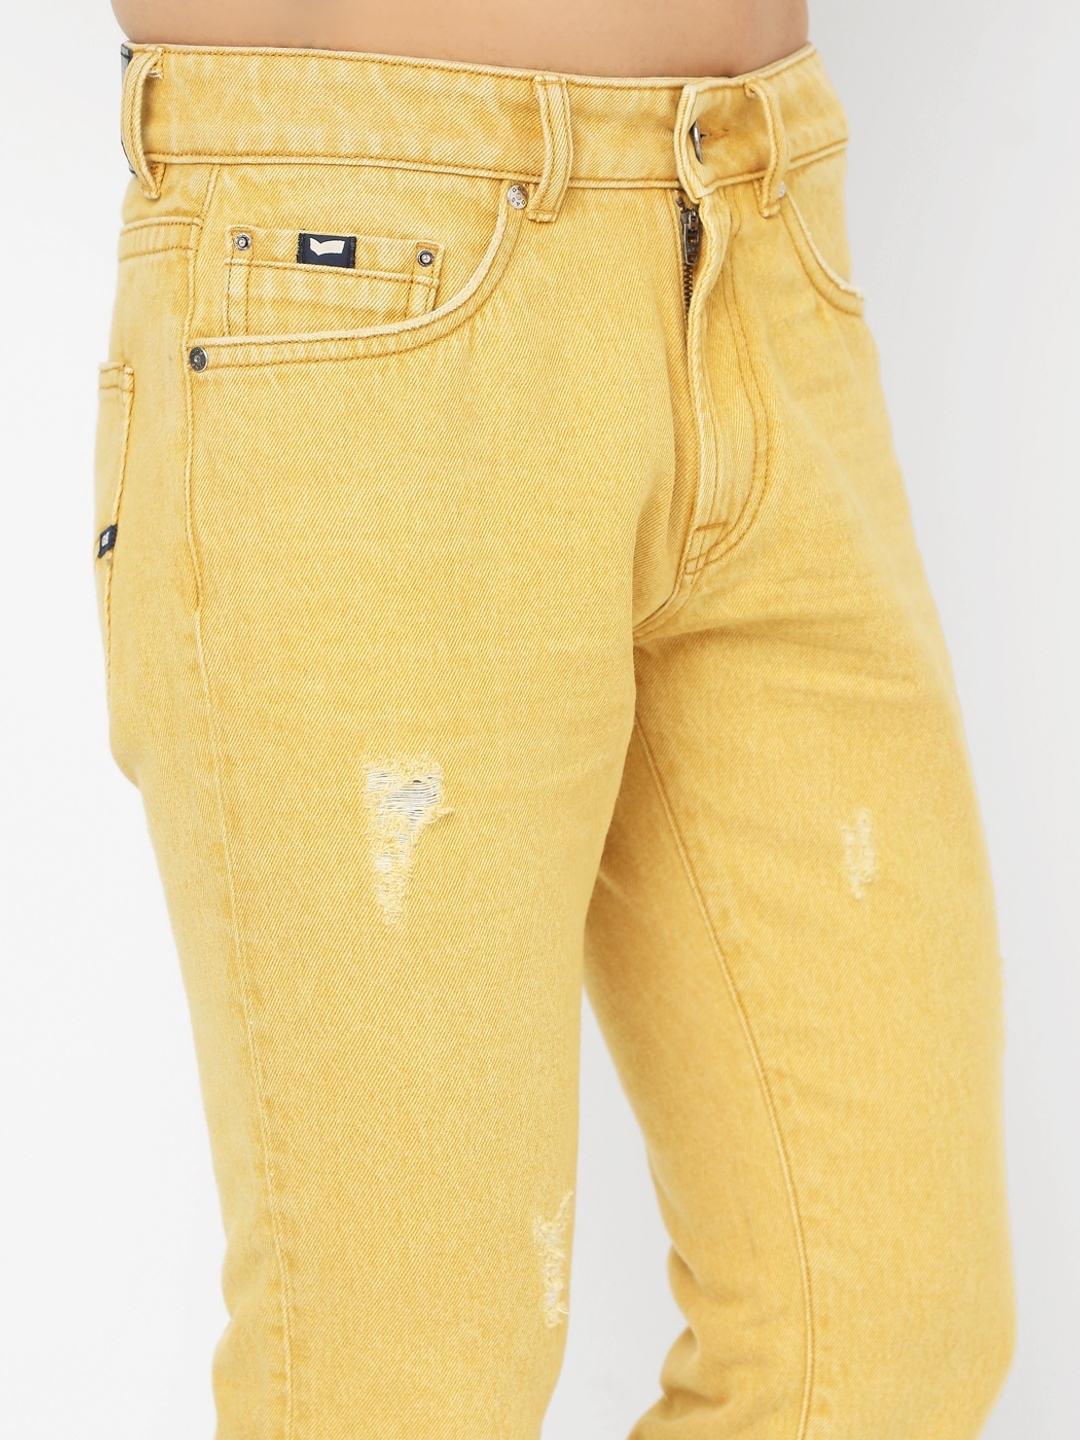 Men's Norton Carrot In Carrot Fit Amber Jeans